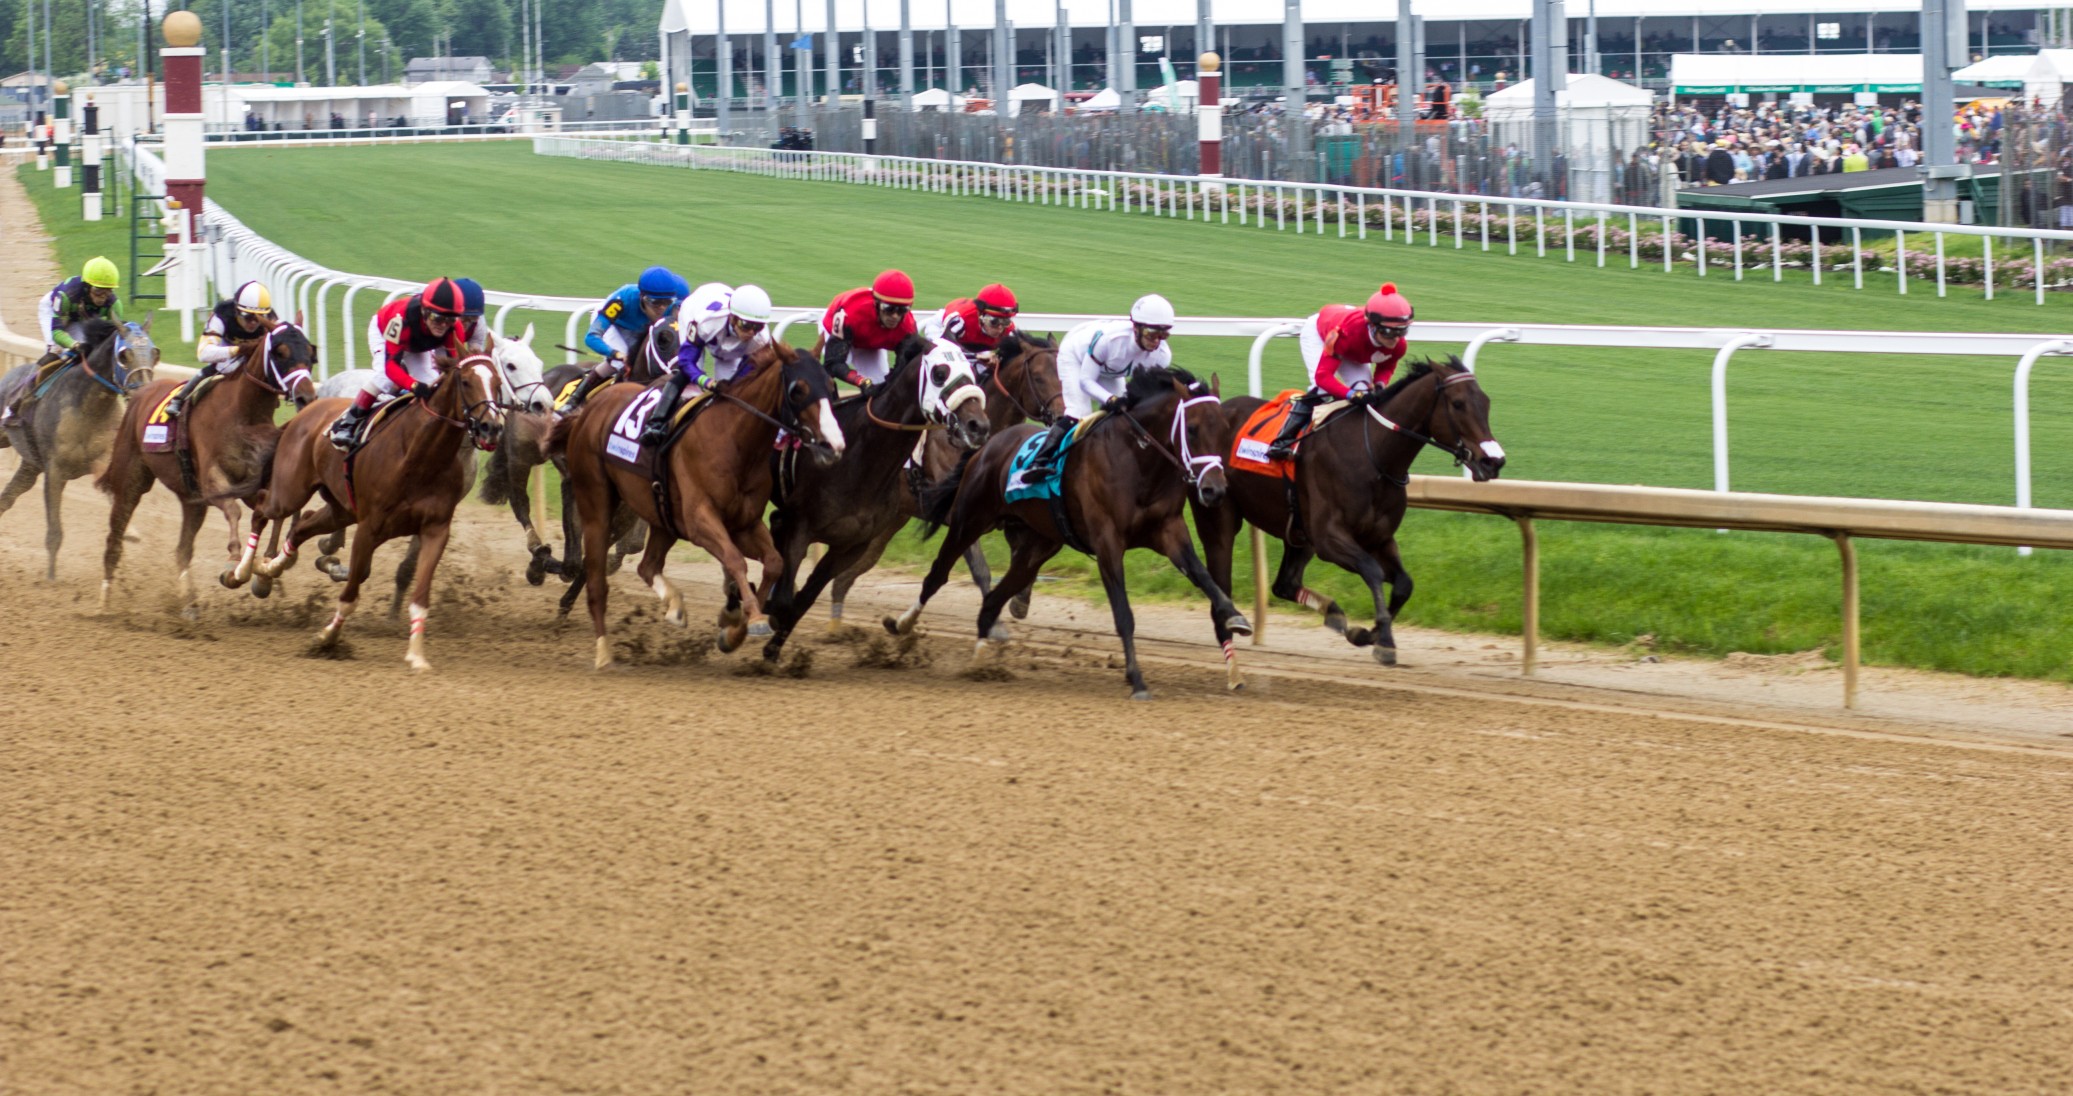 Heading to the Kentucky Derby? Here's What To Expect from the Weather